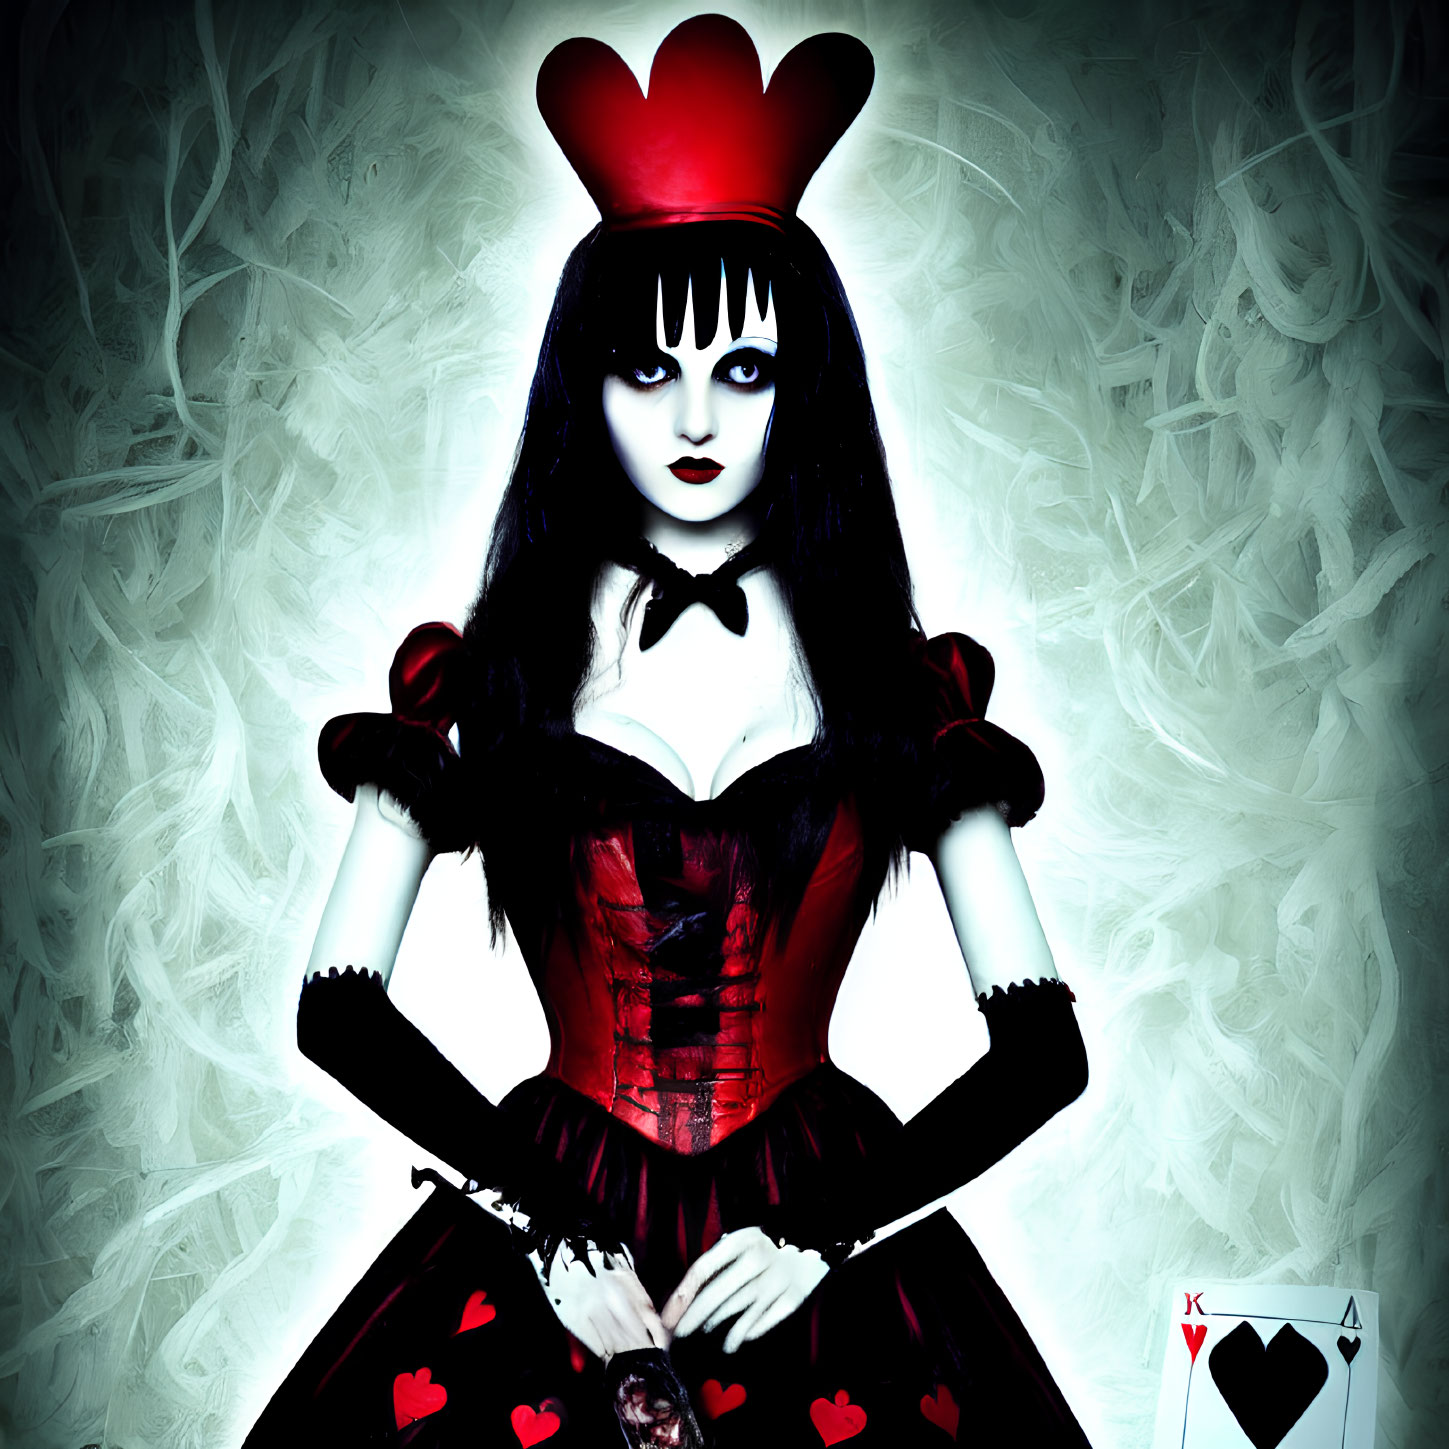 Gothic Queen of Hearts with pale complexion and dark attire